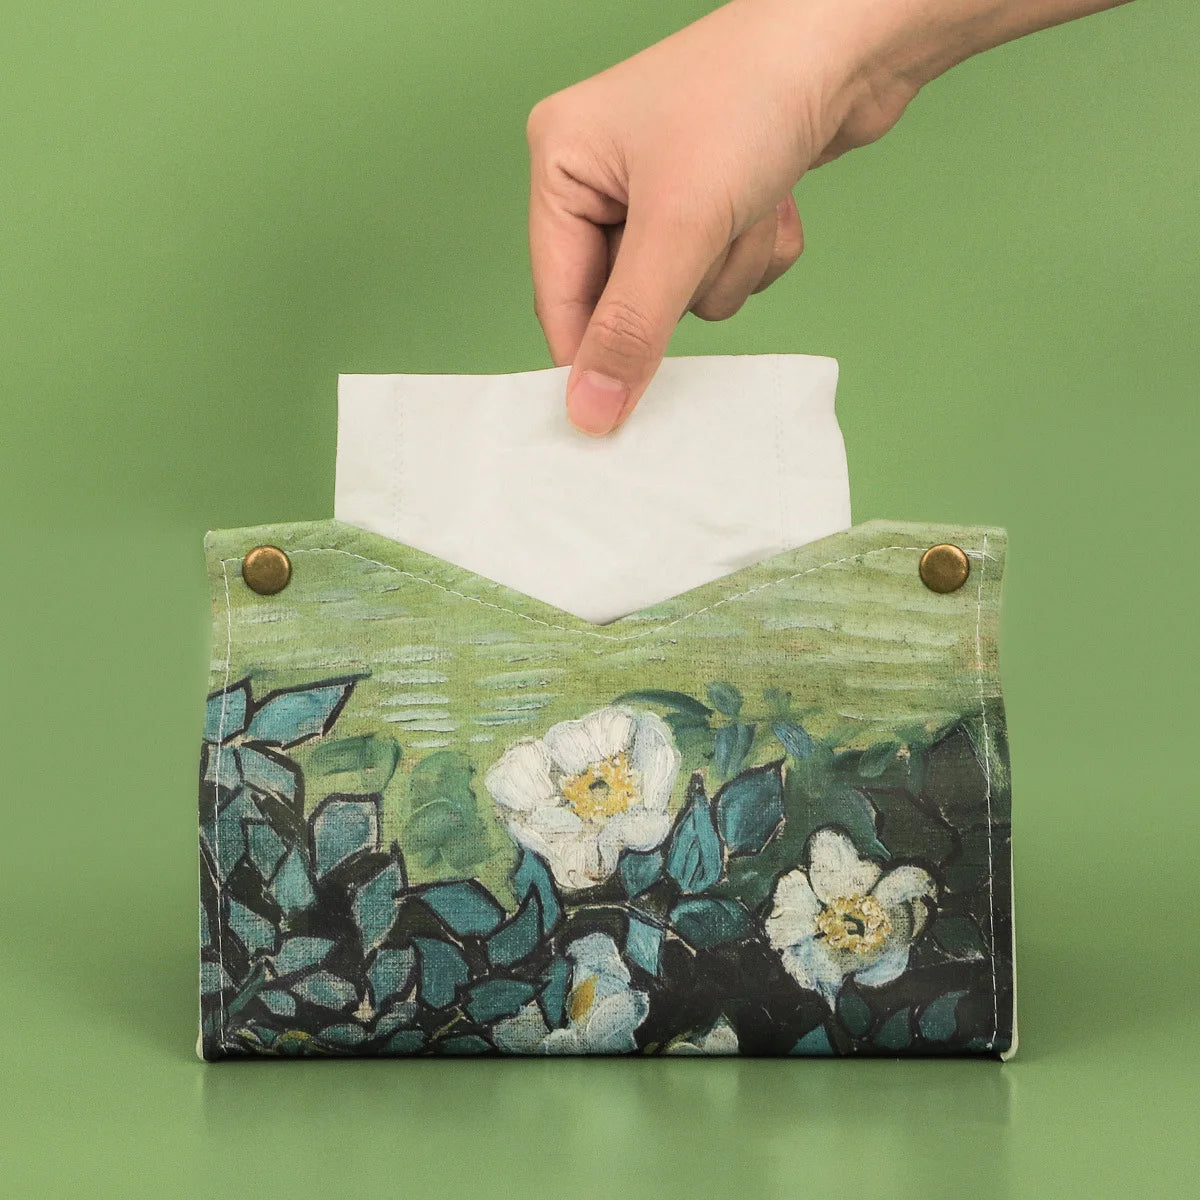 Oil painting tissue box